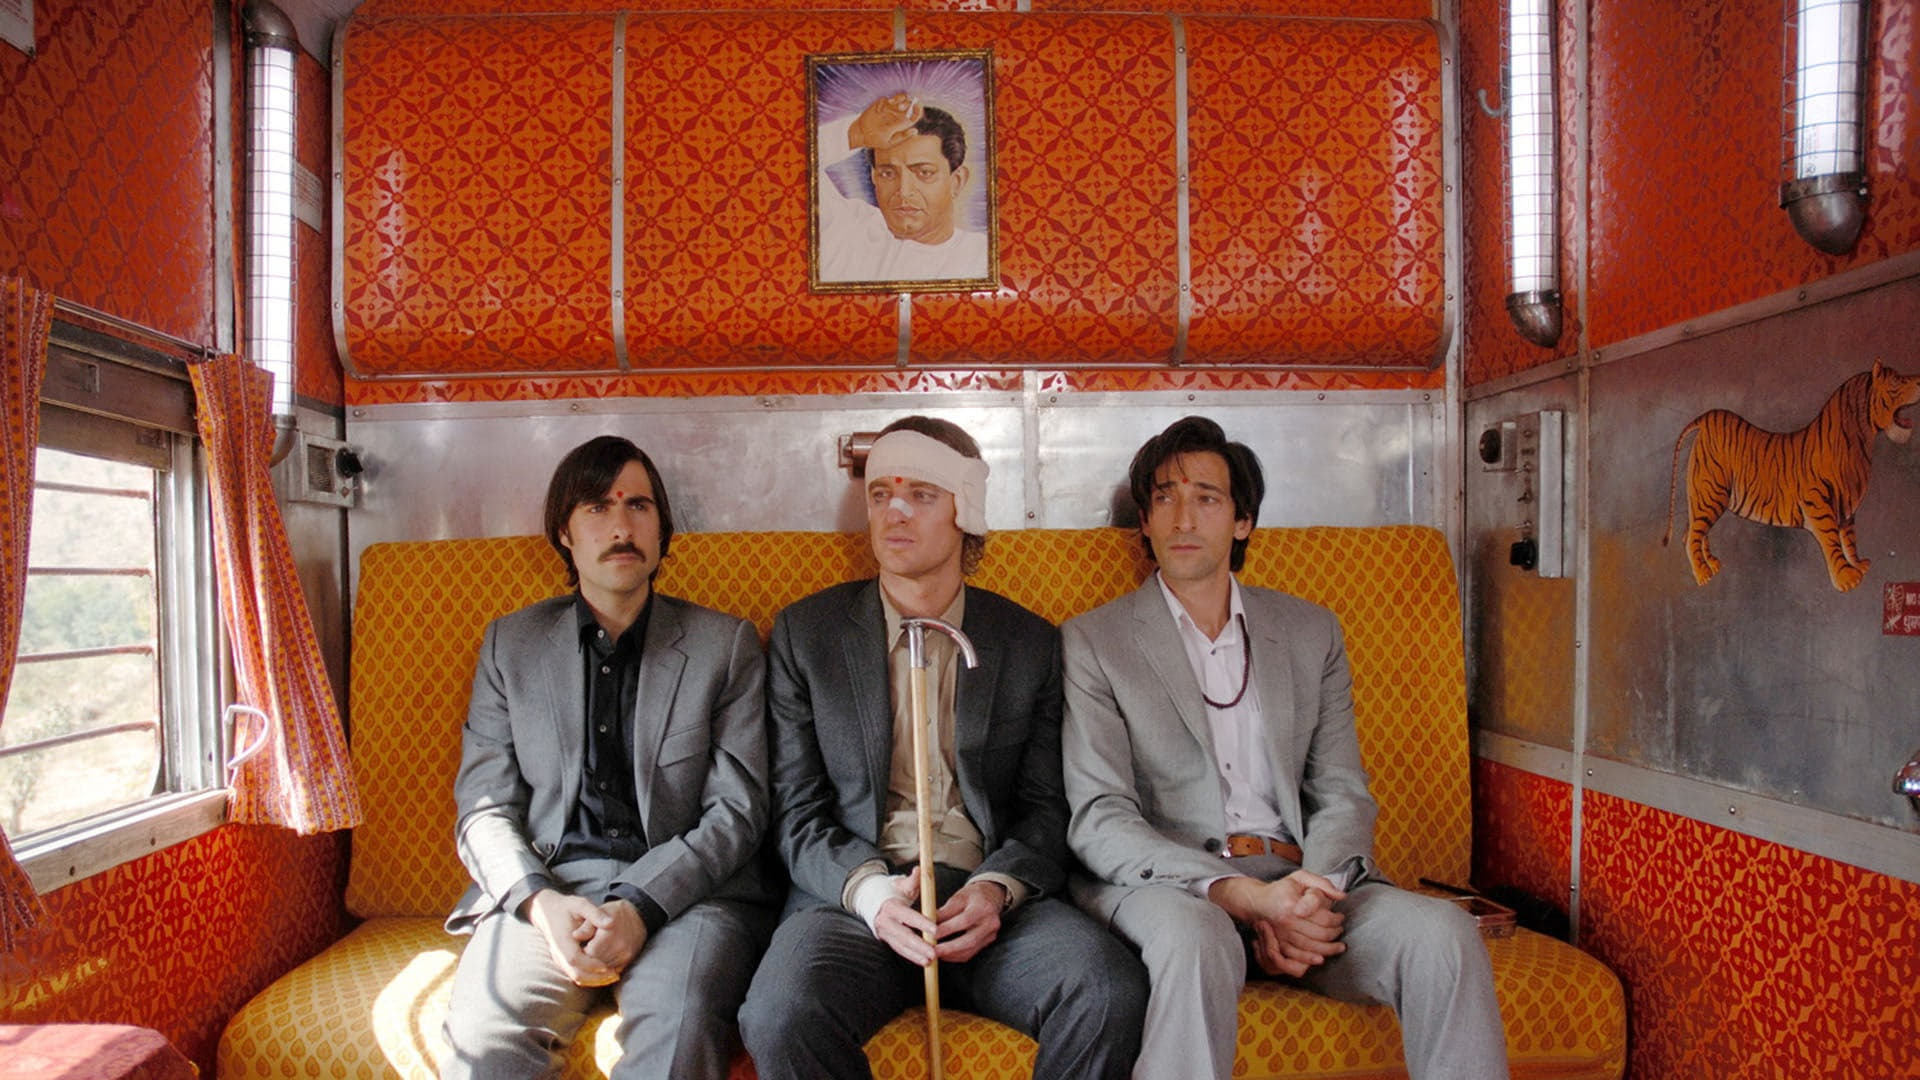 The Darjeeling Limited by Cameron Thorne